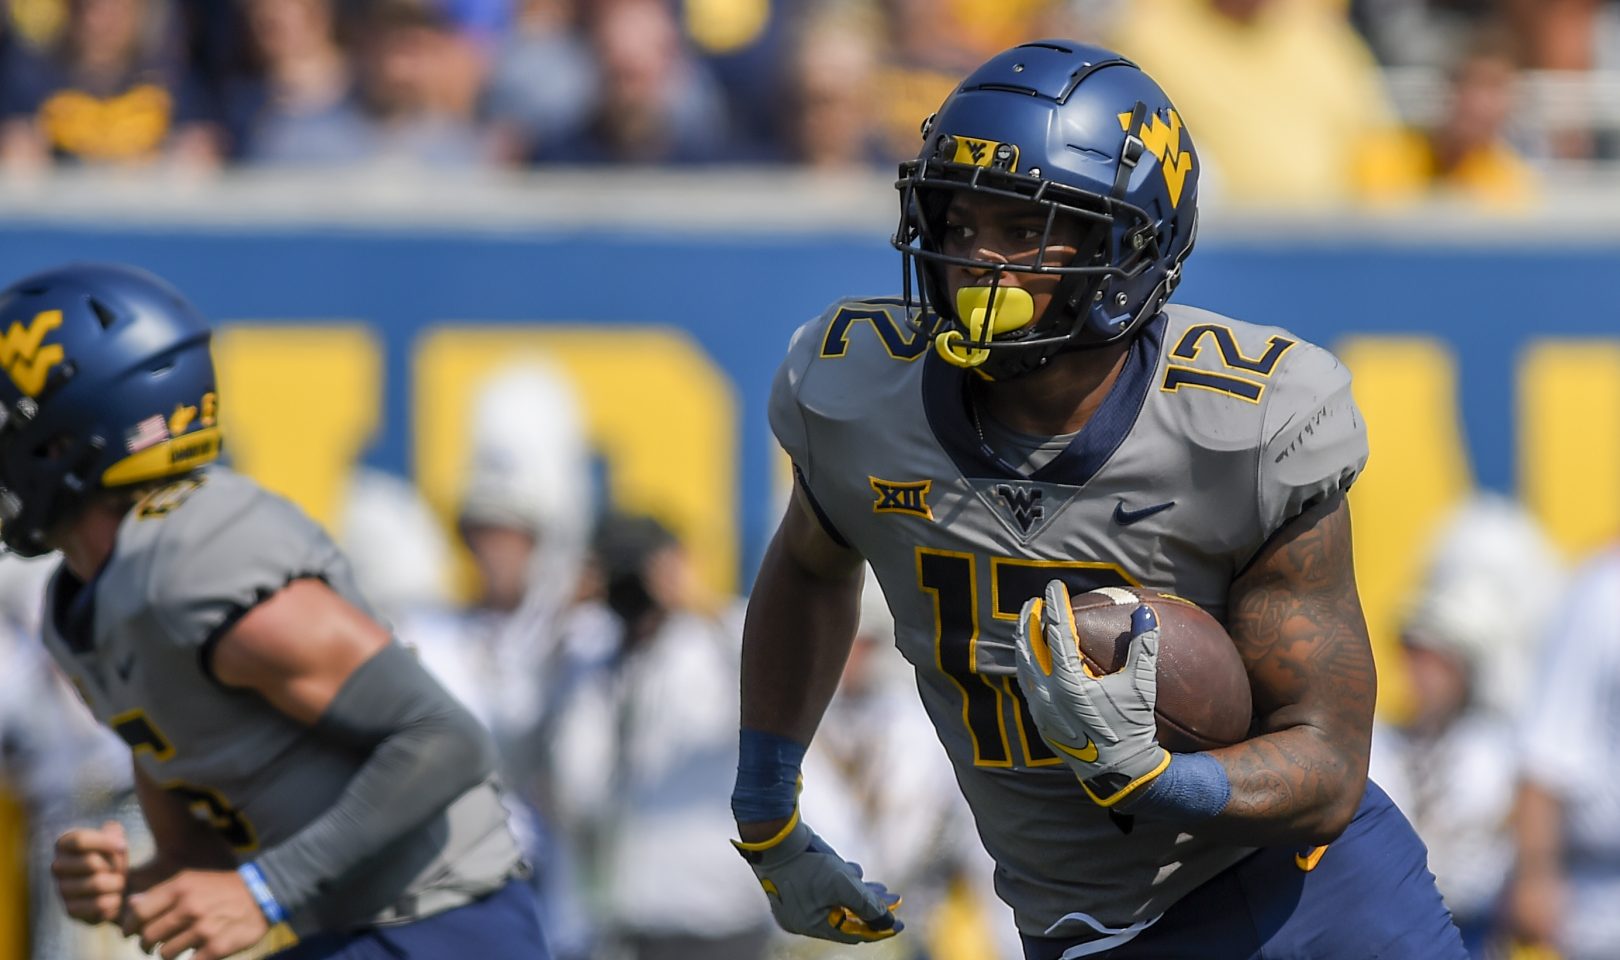 WVU running back CJ Donaldson bursts onto the scene for Mountaineers